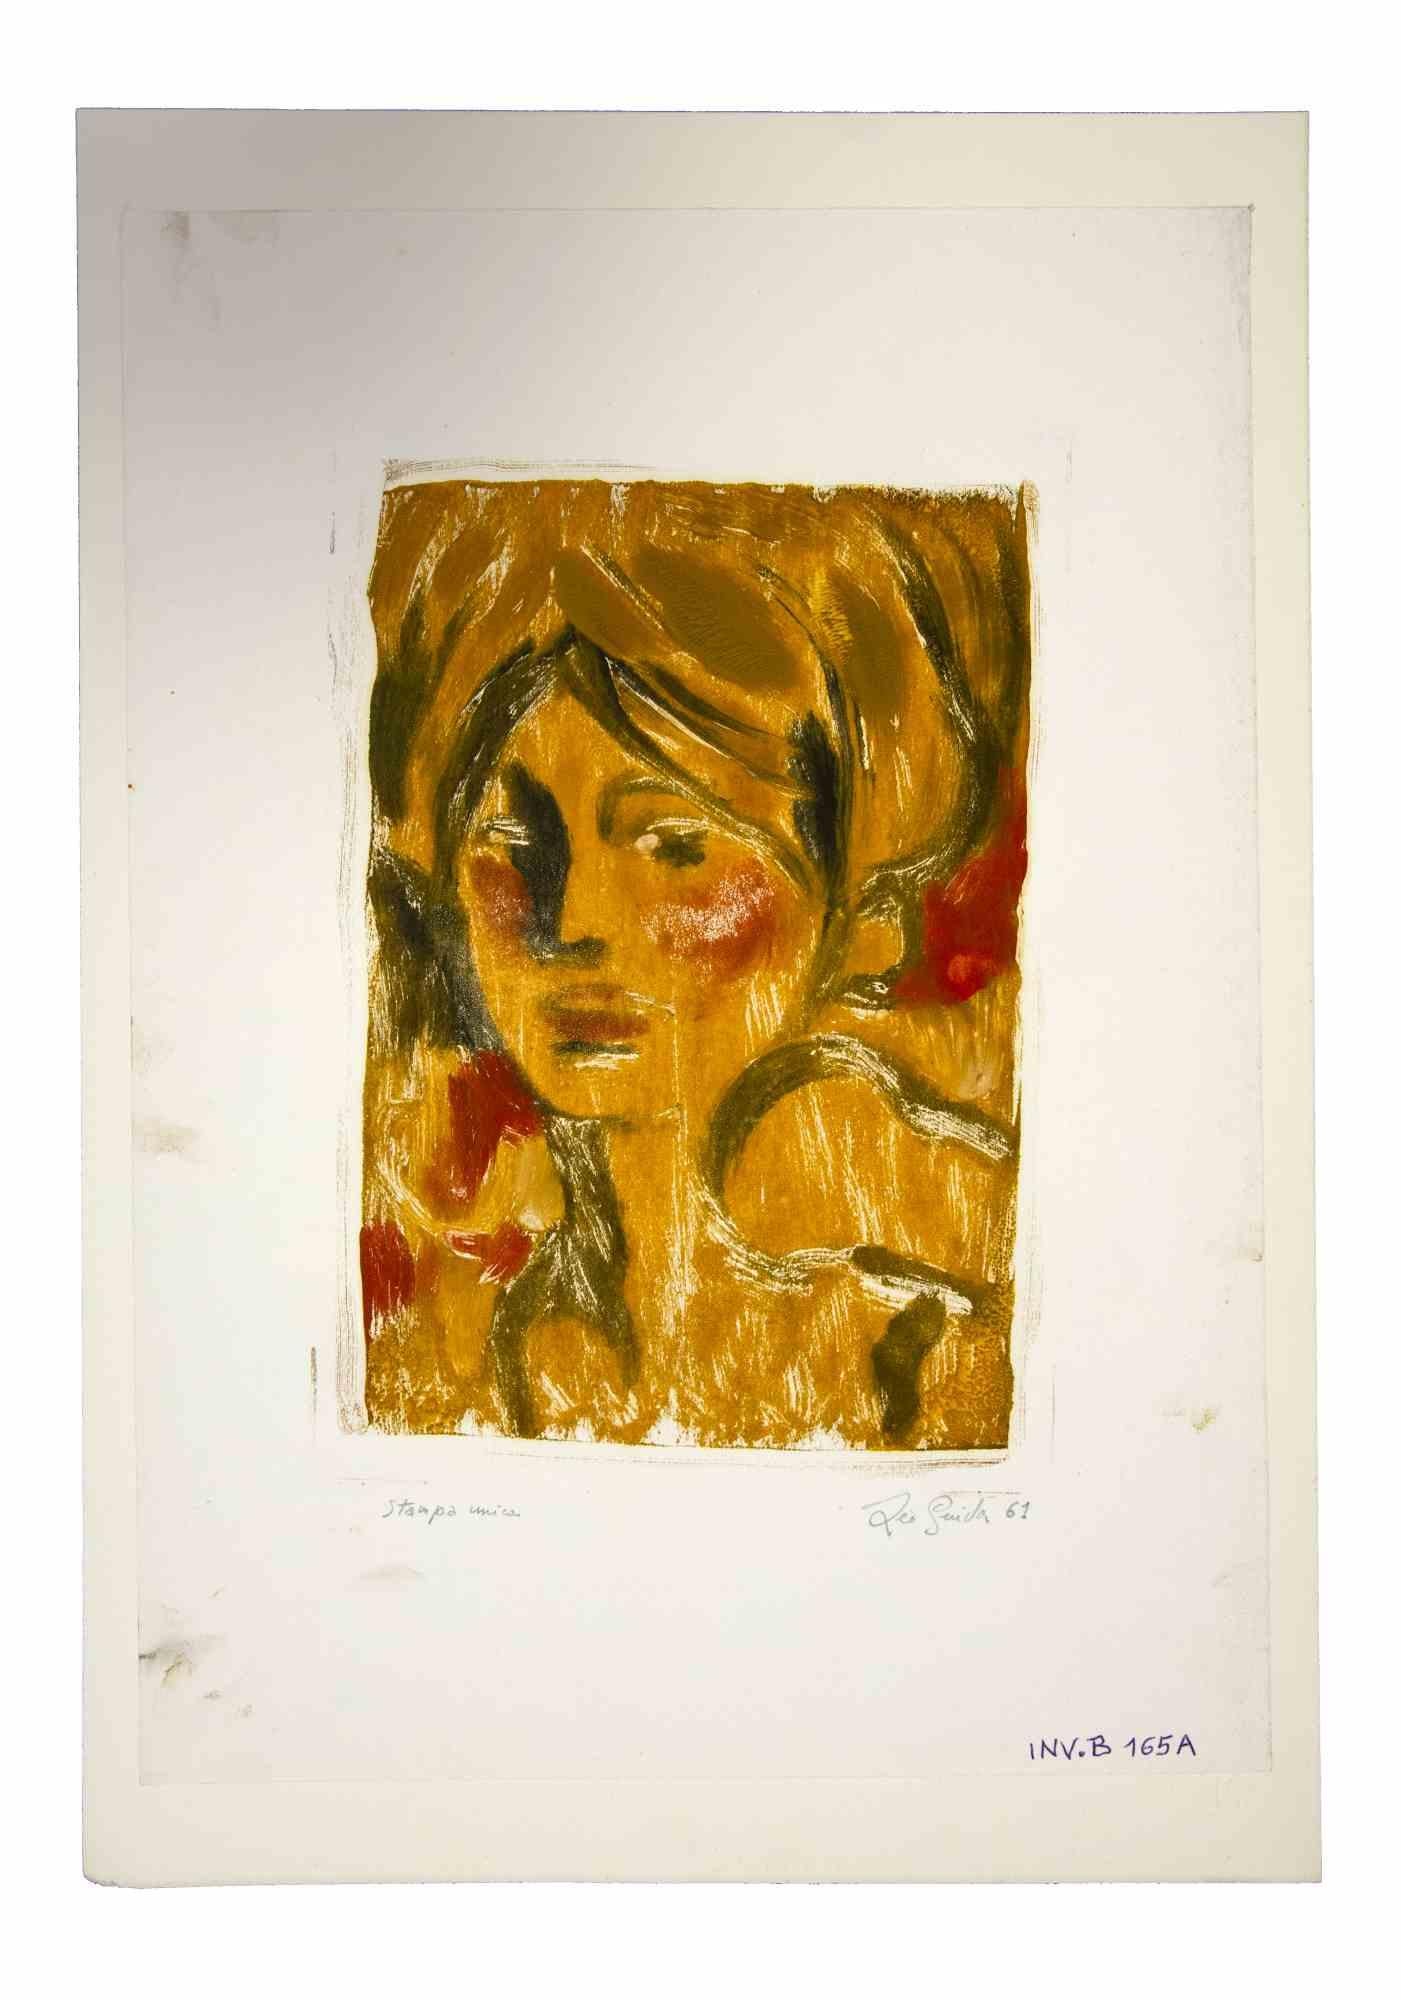 Portrait is an original Contemporary artwork realized in 1961 by the italian Contemporary artist  Leo Guida  (1992 - 2017).

Original drawing in mixed media on ivory-colored paper, glued on cardboard (50 x 35 cm)
 
Hand-signed and dated on the lower